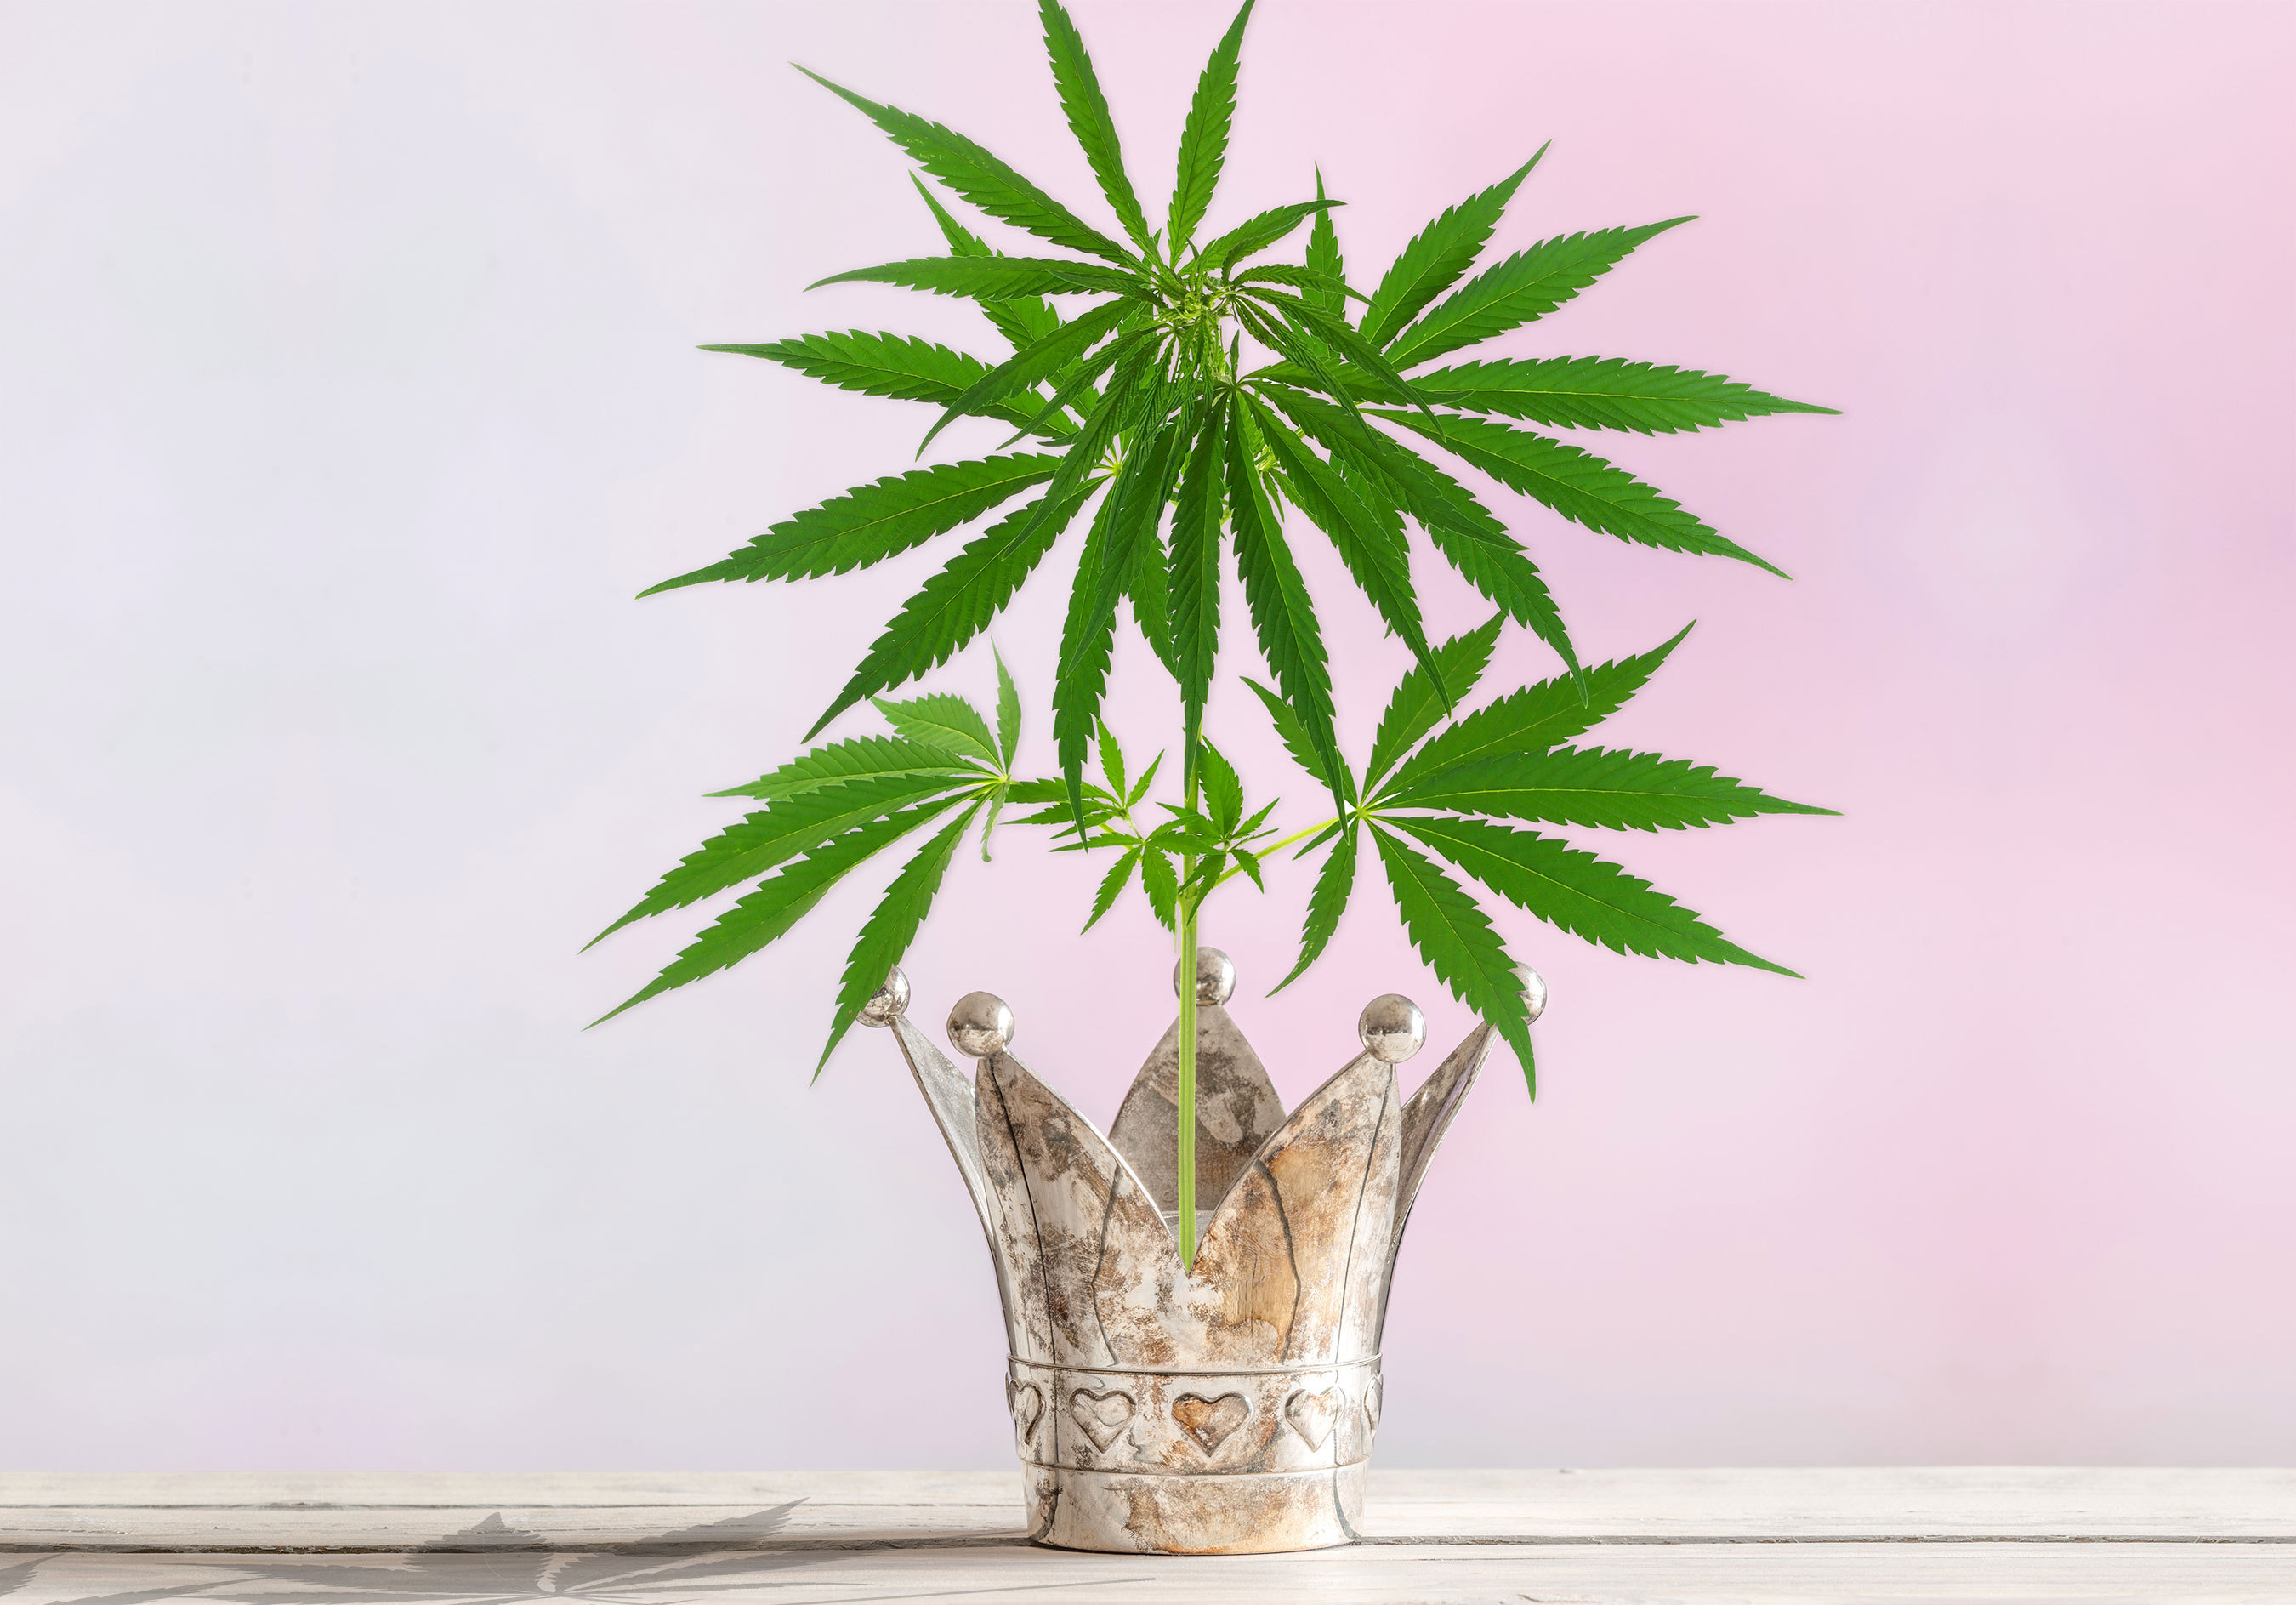 COULD INDUSTRIAL HEMP BE THE NEXT HEIR TO THE THRONE?